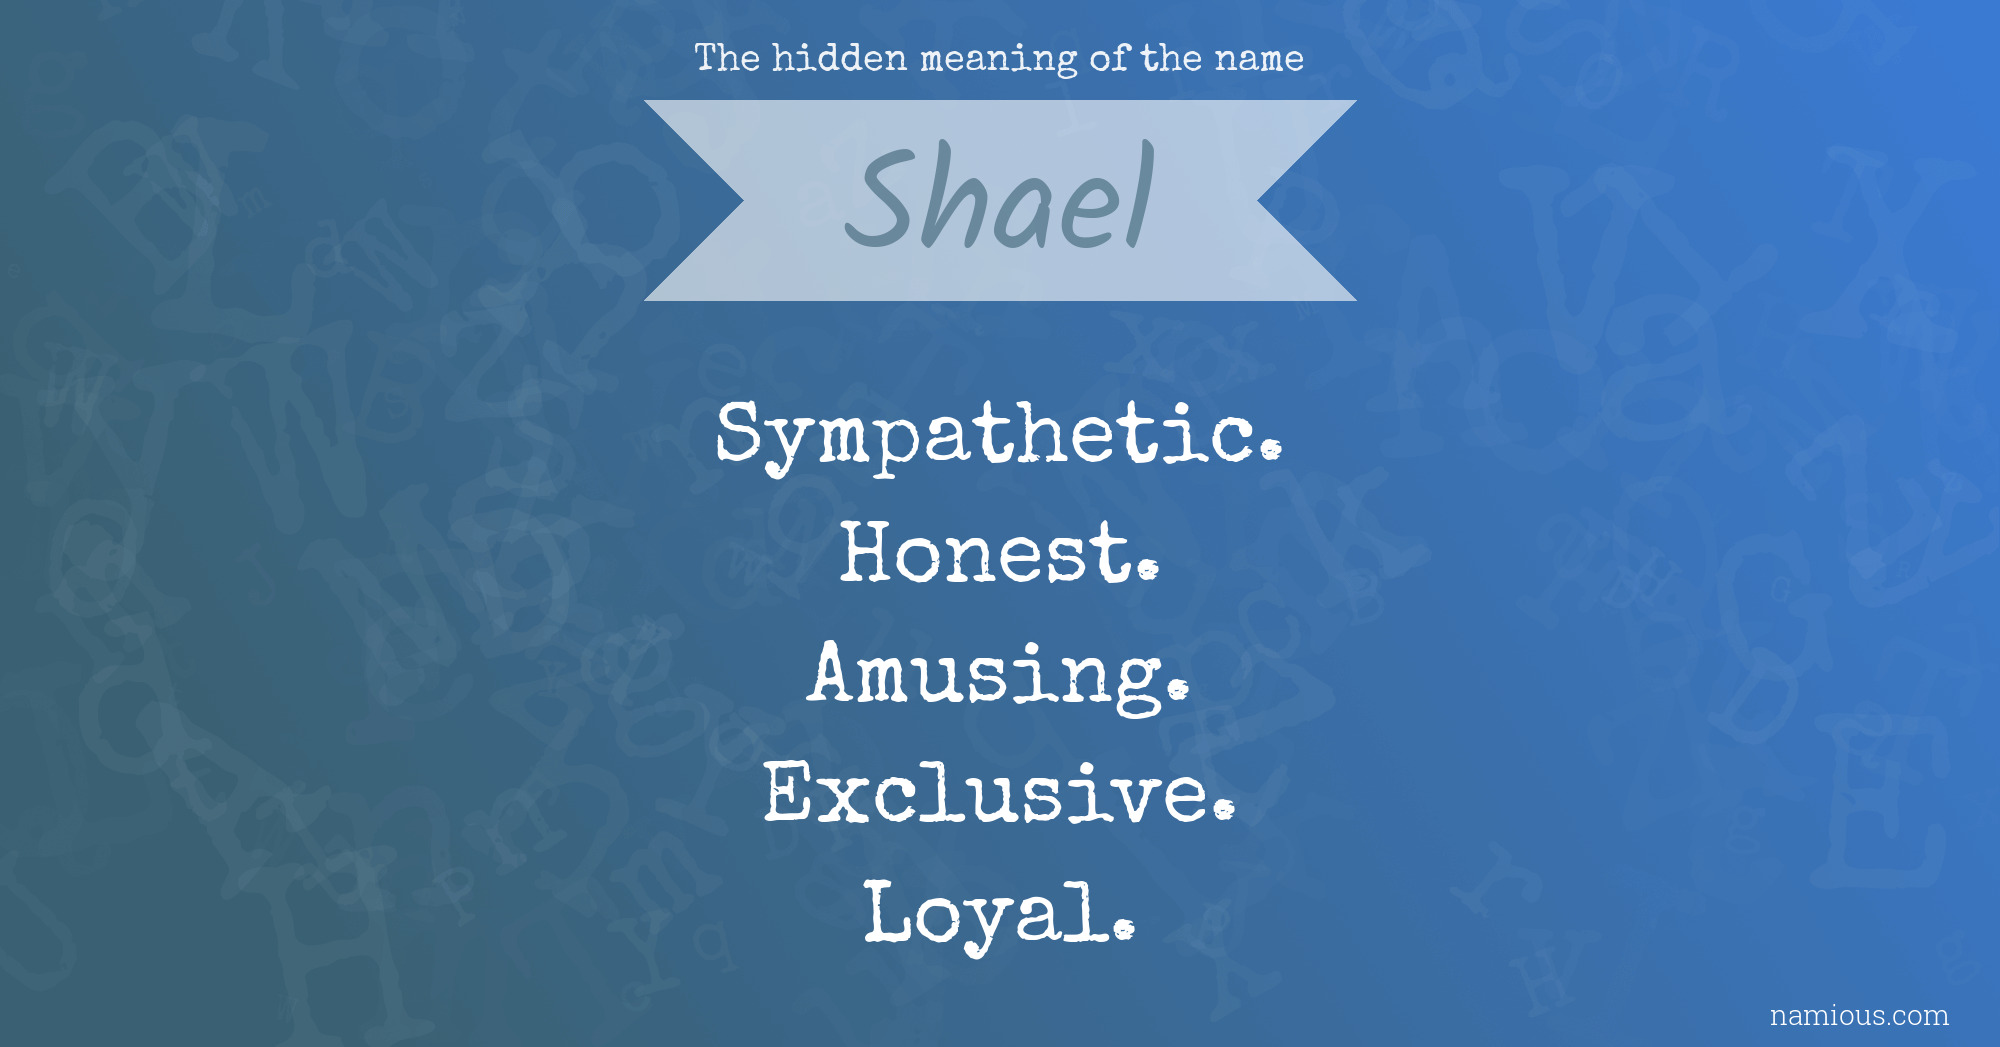 The hidden meaning of the name Shael